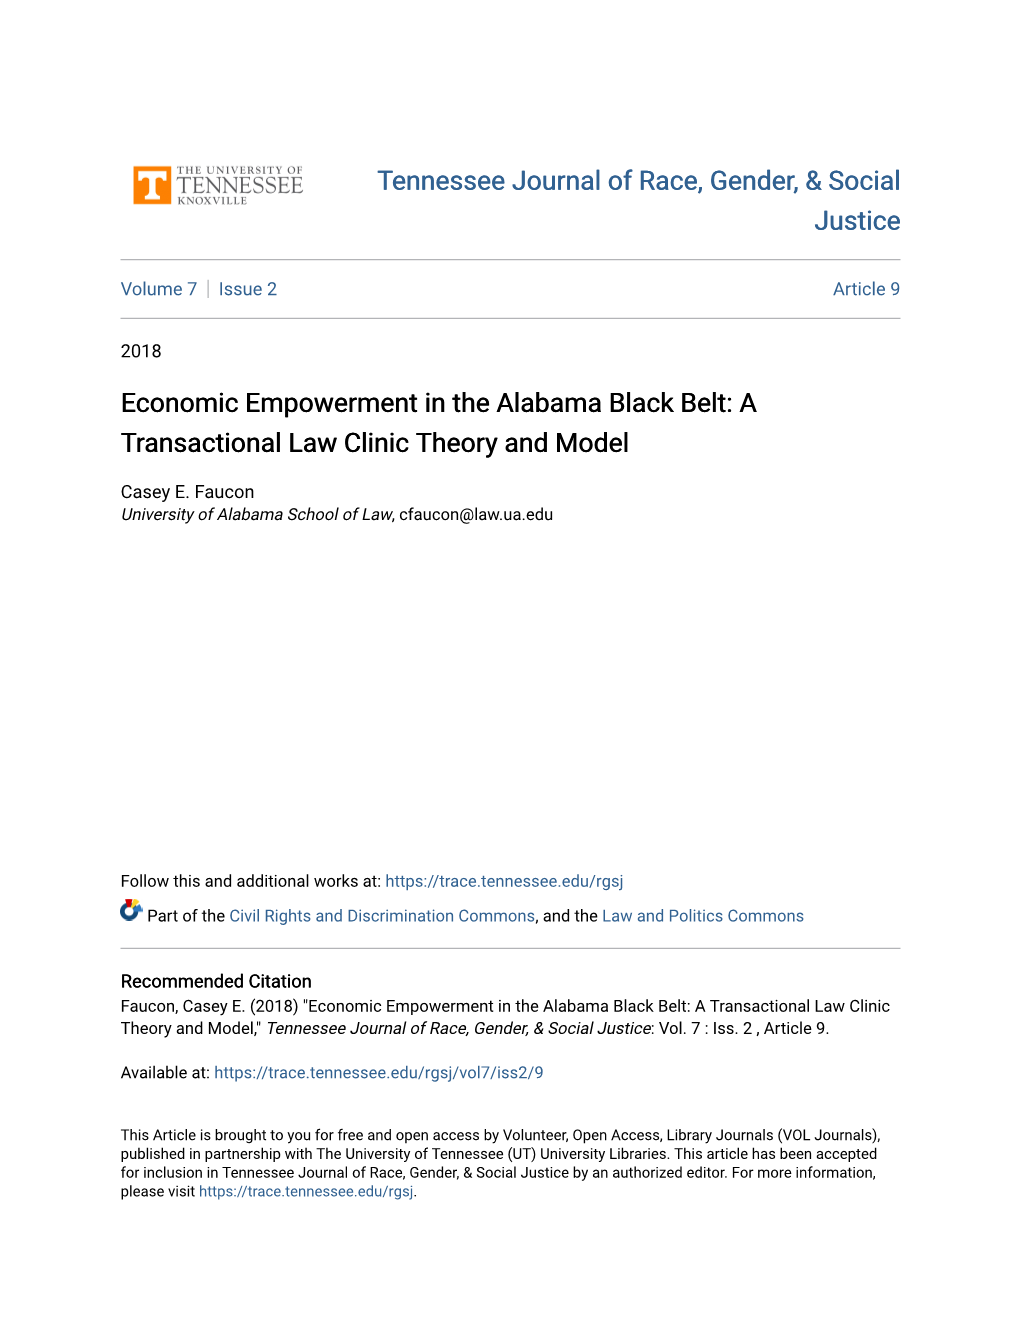 Economic Empowerment in the Alabama Black Belt: a Transactional Law Clinic Theory and Model